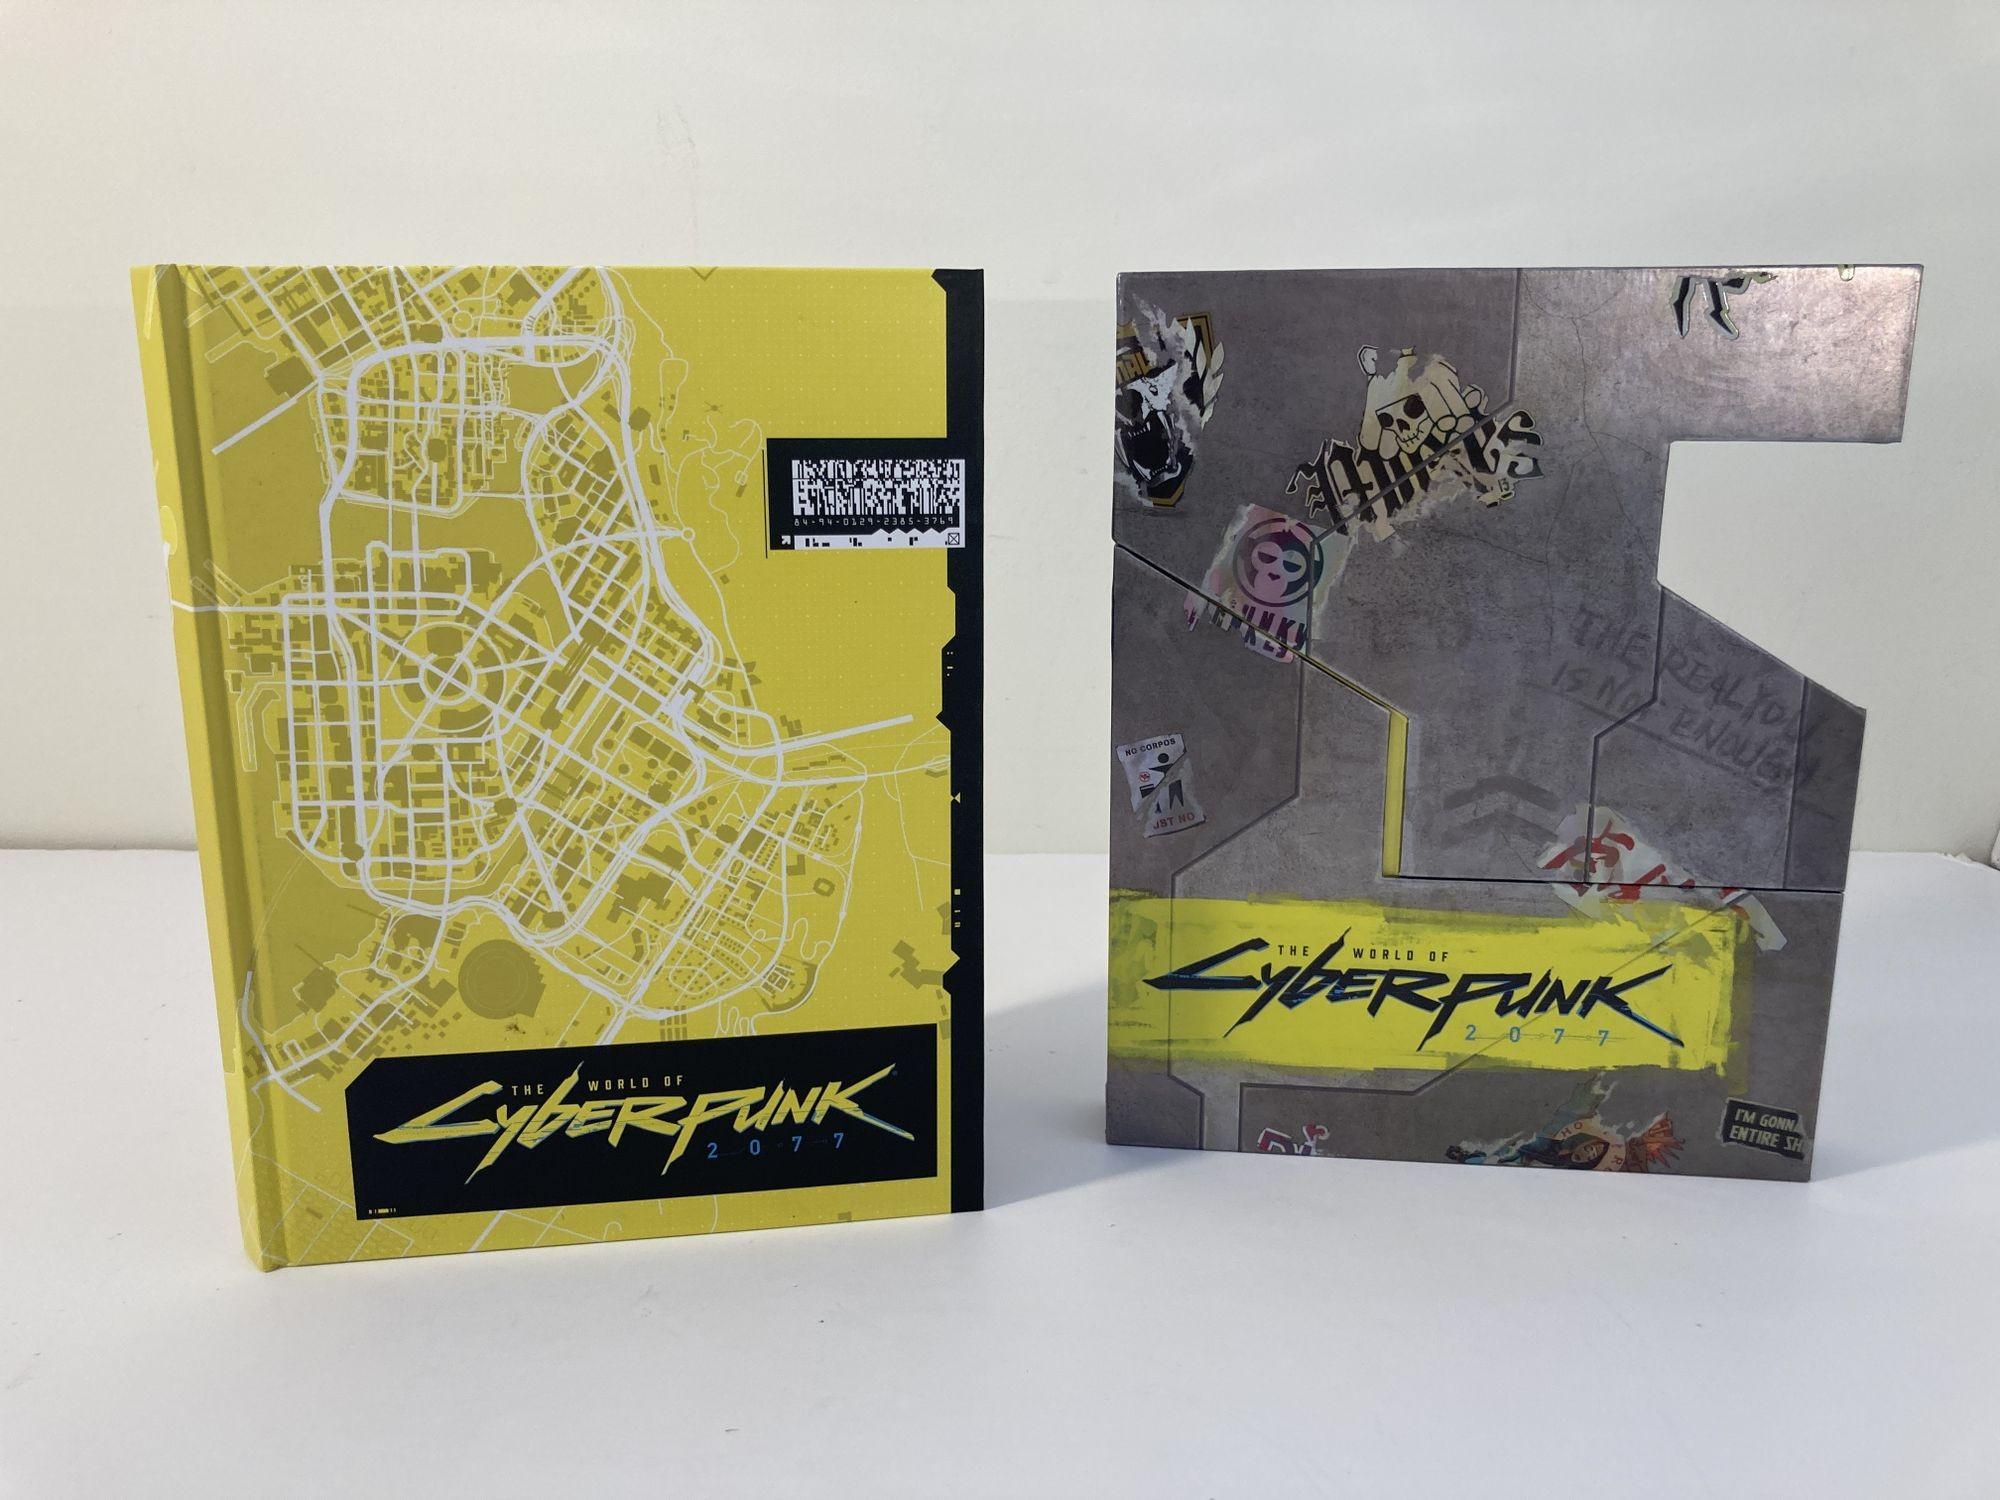 World of Cyberpunk 2077 HC (2020 Dark Horse) comic book
Includes Book and CD
1st printing. 1st Edition
Published Jul 2020 by Dark Horse
By Marcin Batylda.
The deluxe edition features:
o An exclusive cover and slipcase.
o A set of four Night